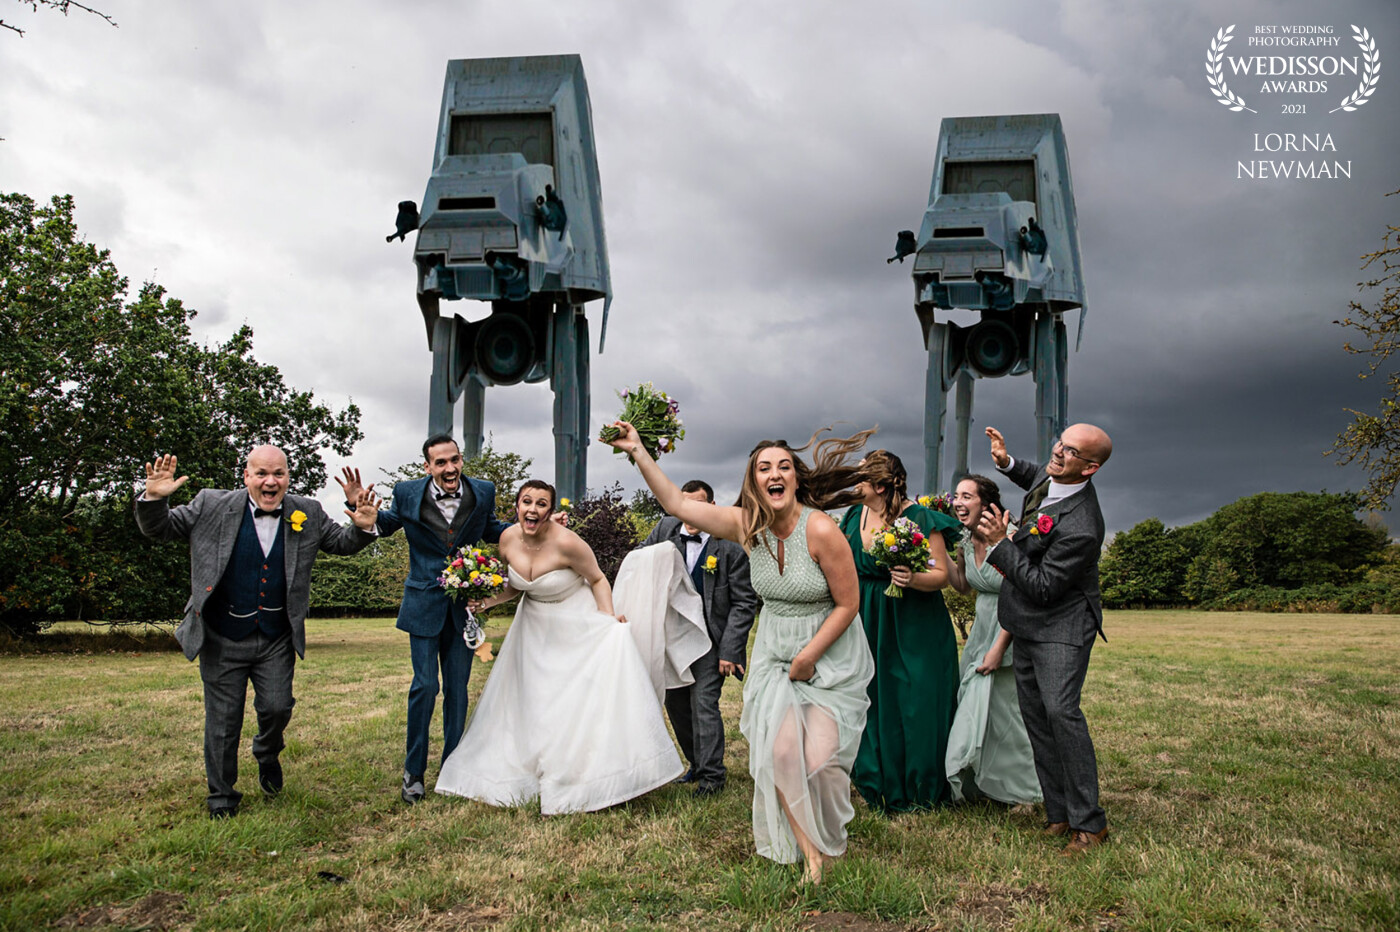 When the groom only asks for one picture on his wedding day that includes an imperial walker from Star Wars then you must oblige. We had a lot of fun creating this image at Kathryn & Ryans wedding at Anstey Hall in Cambridgeshire, with them and their bridal party.